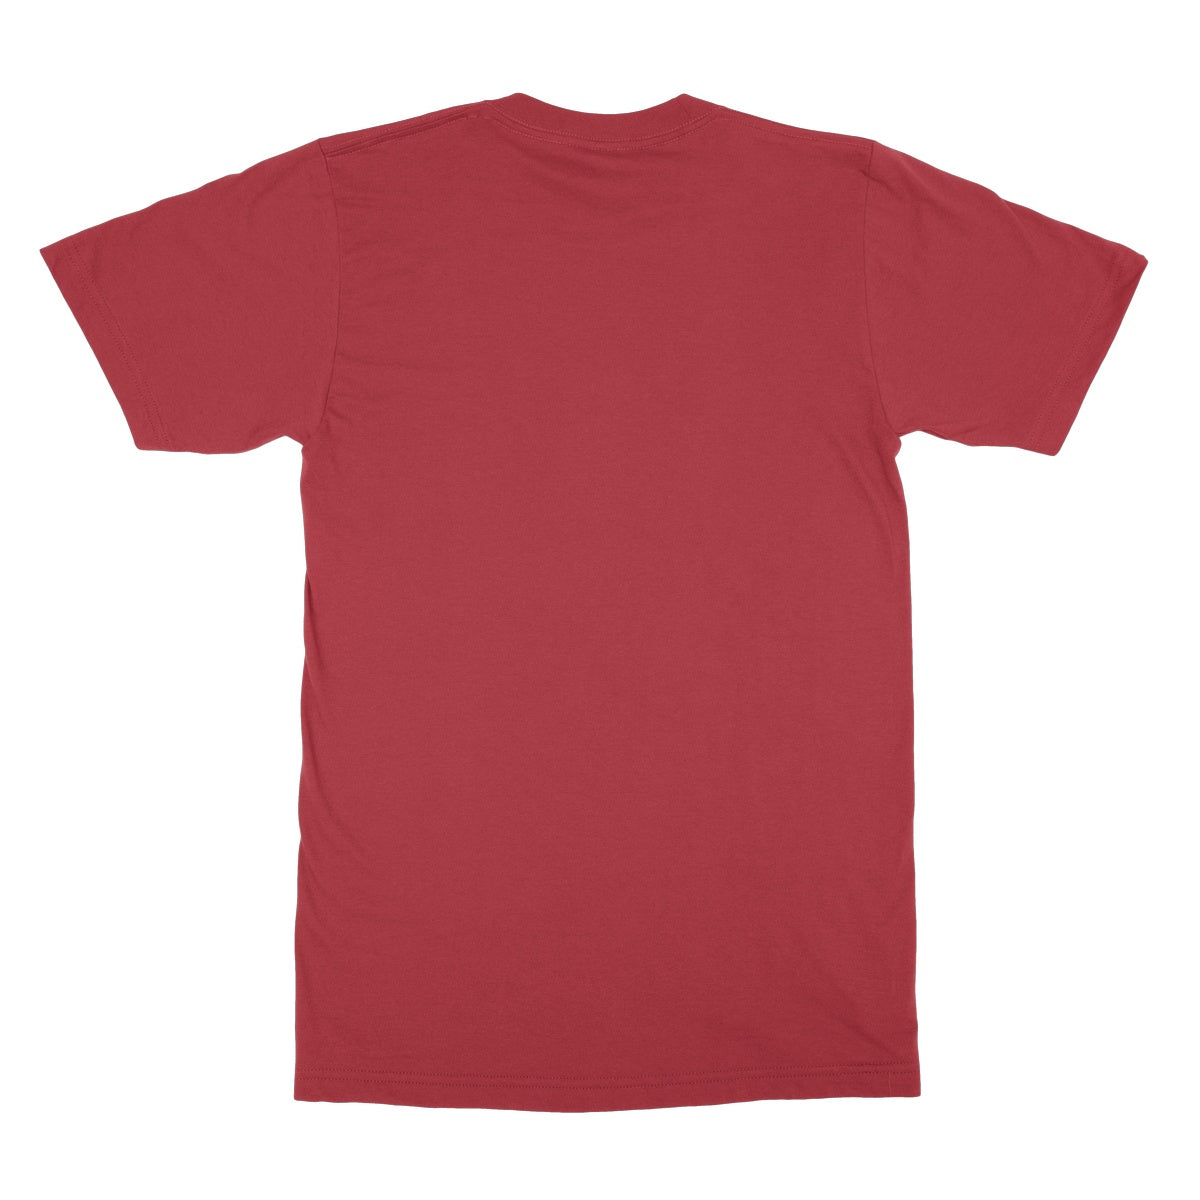 Diatom, Red Softstyle T-Shirt